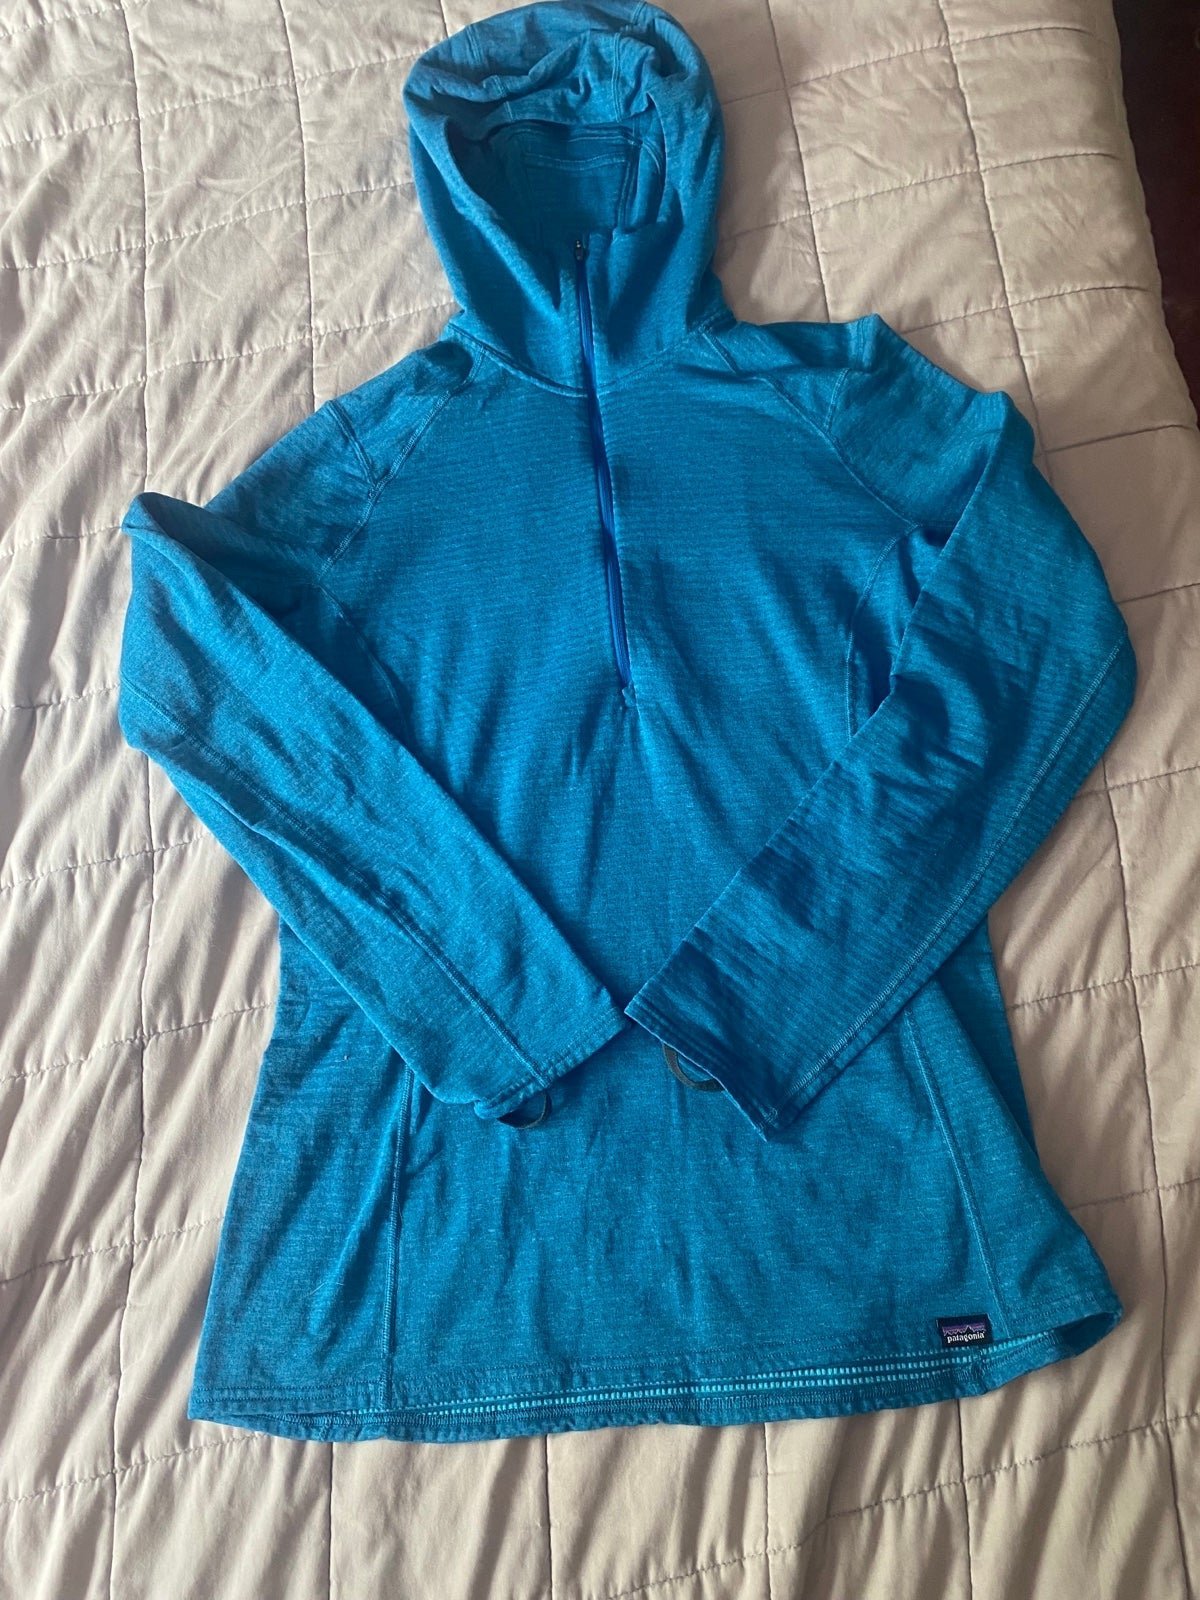 where to buy  Patagonia quarter zip Pullover Top Shirt teal blue J1tFKahcr Hot Sale